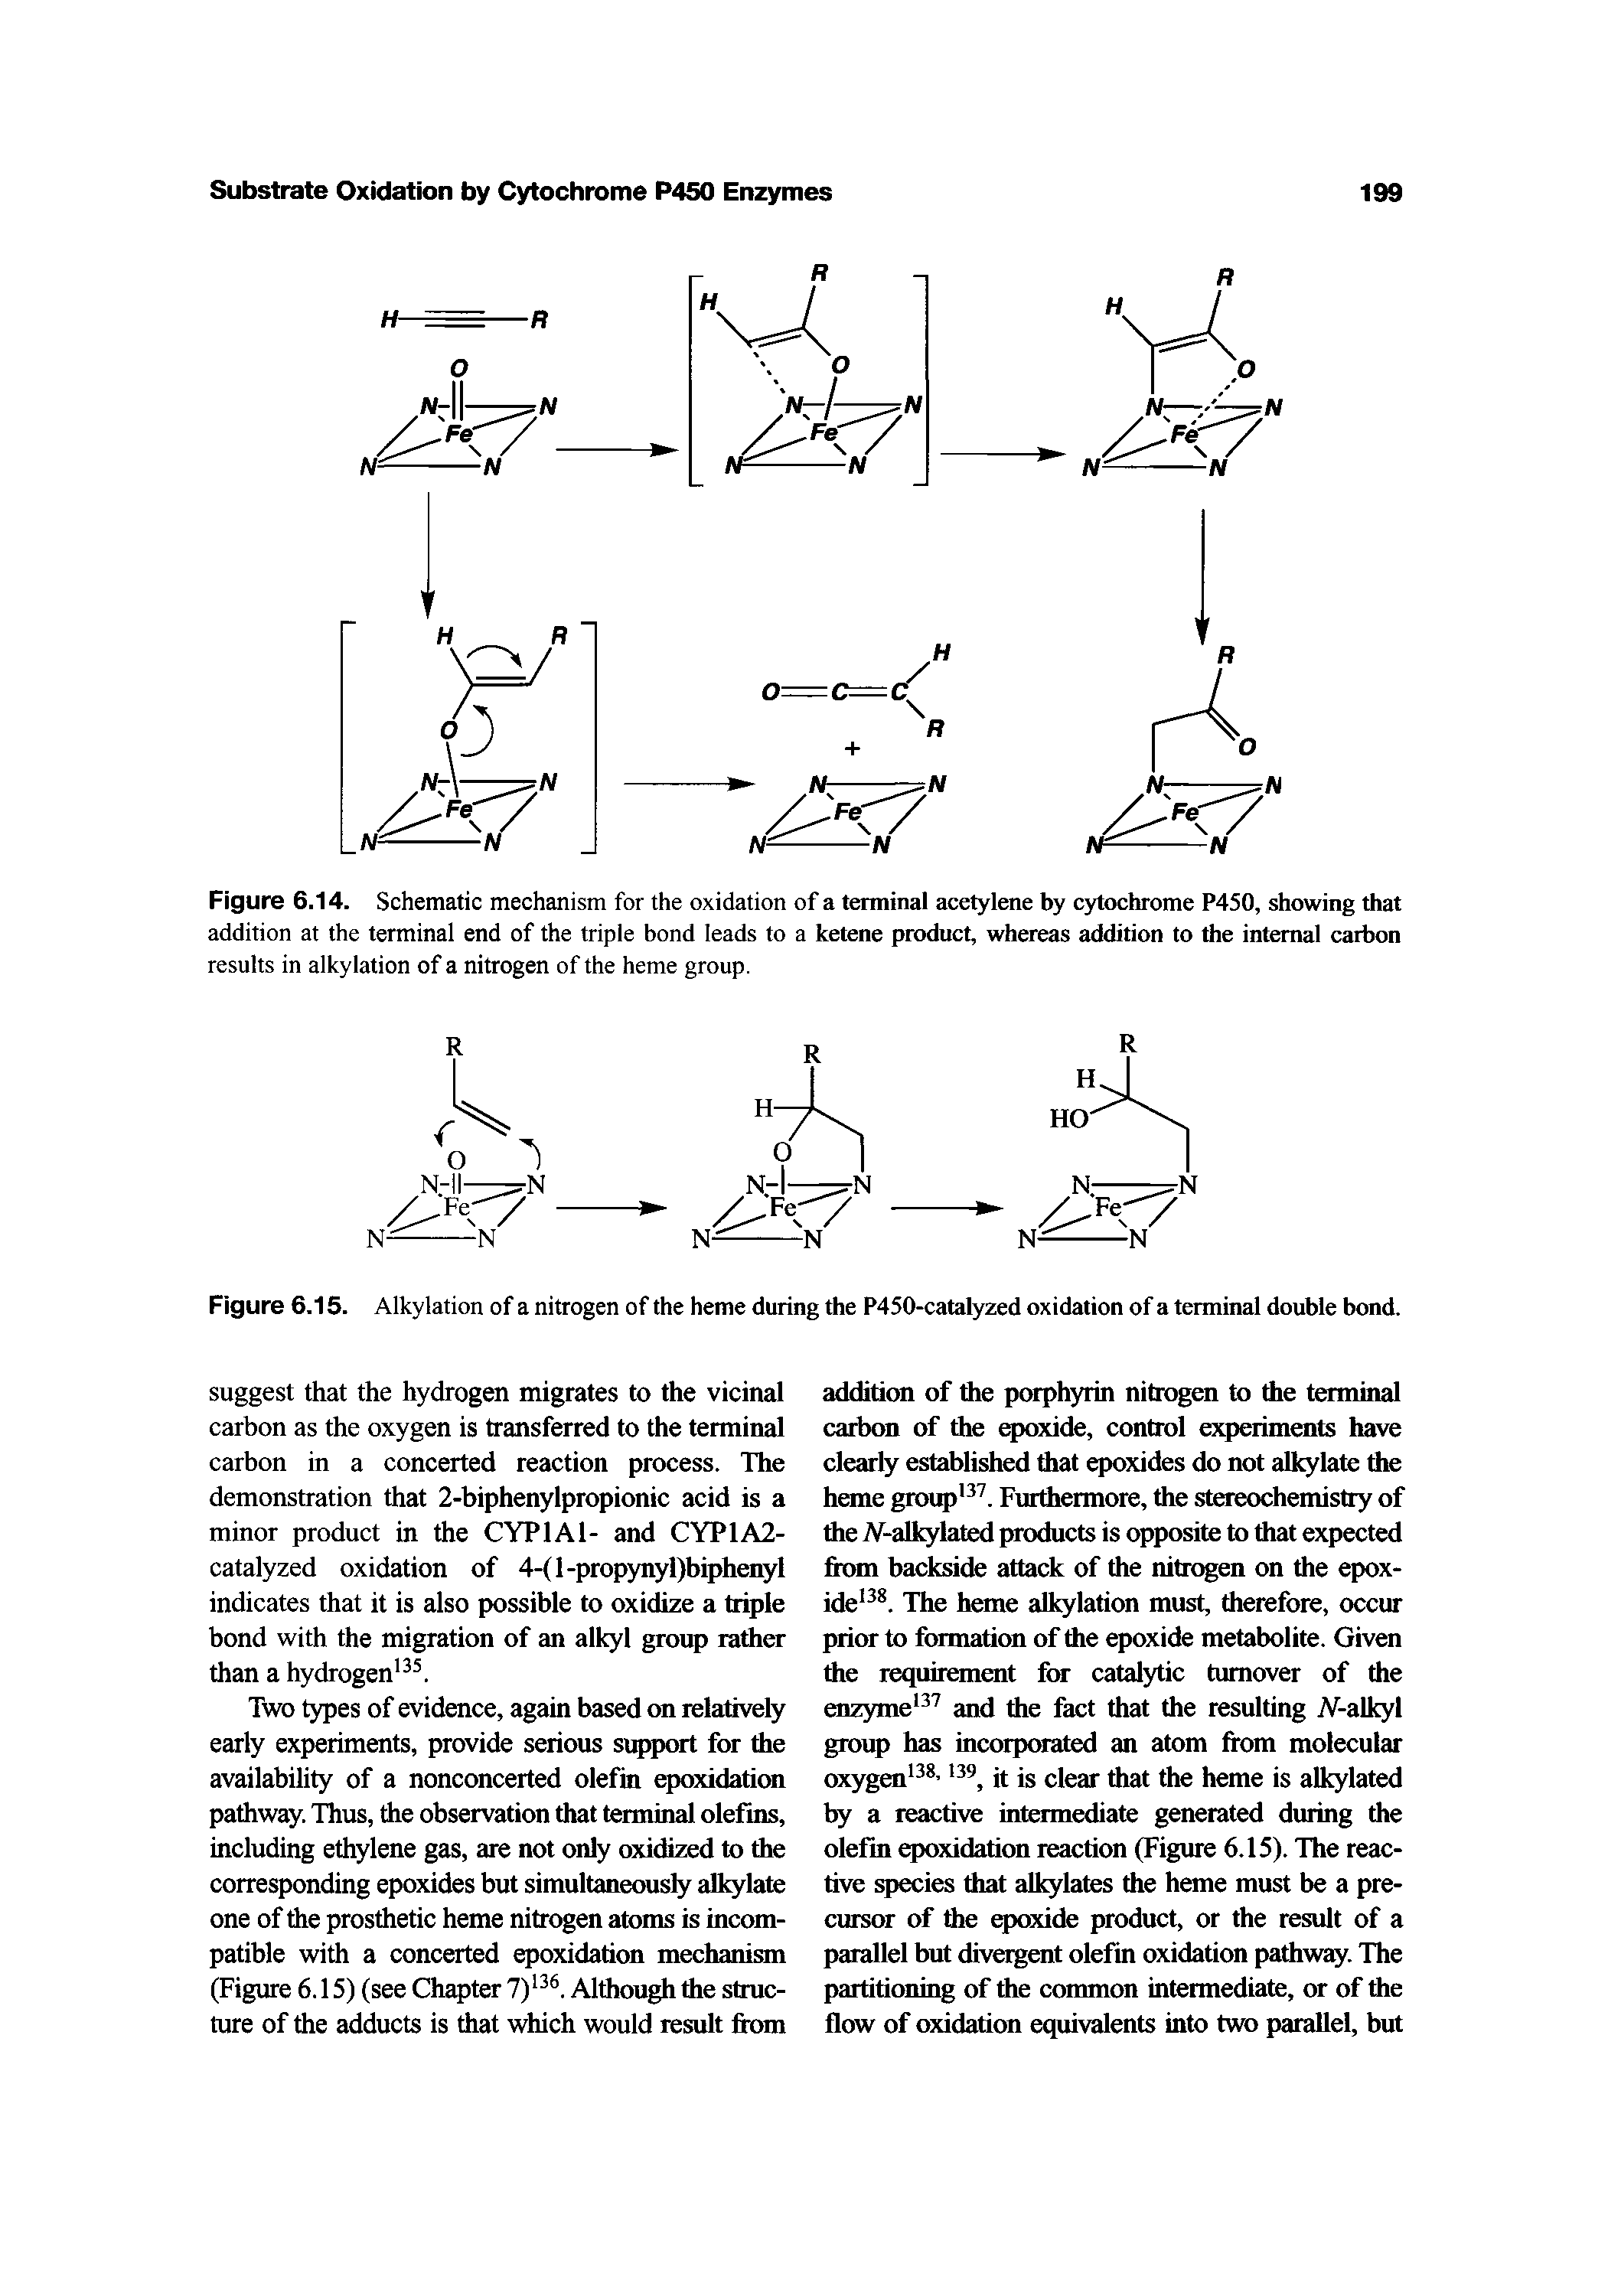 Figure 6.14. Schematic mechanism for the oxidation of a terminal acetylene by cytochrome P450, showing that addition at the terminal end of the triple bond leads to a ketene product, whereas addition to the internal carbon results in alkylation of a nitrogen of the heme group.